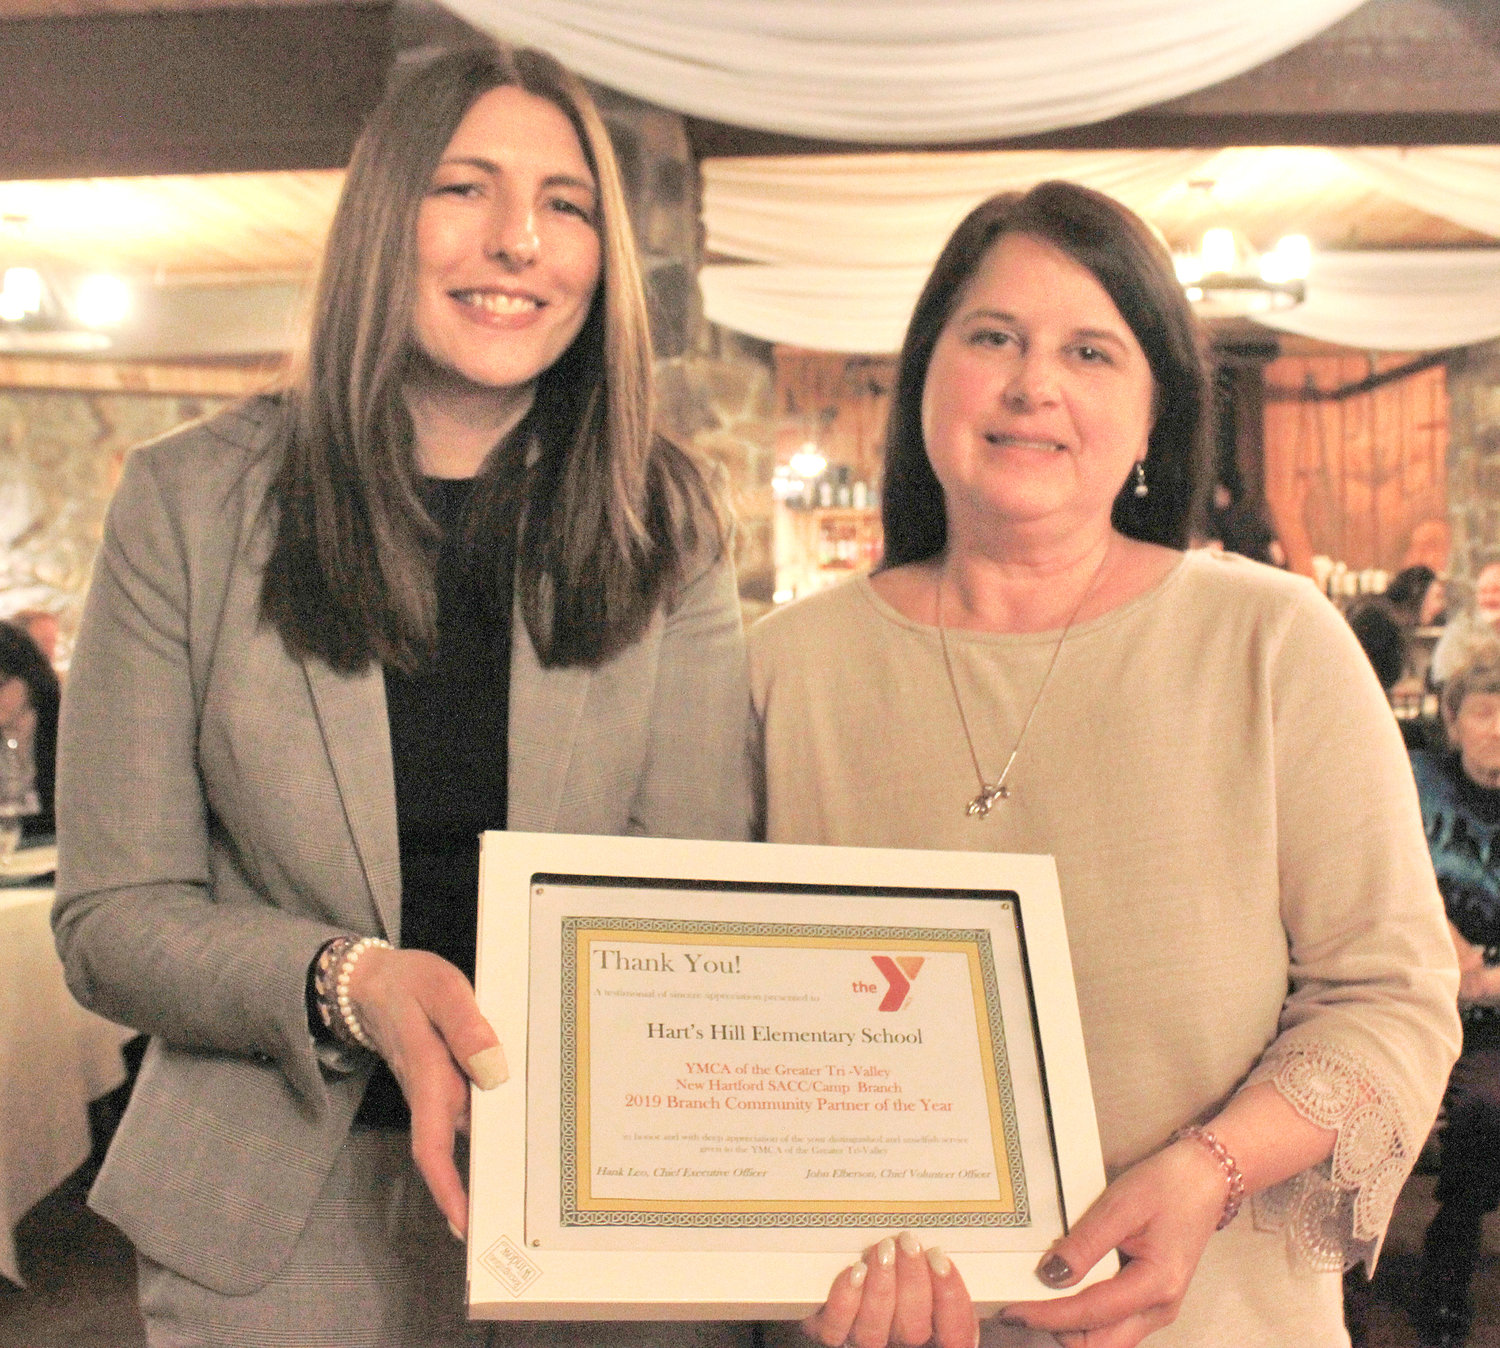 NEW HARTFORD PARTNER — Hart's Hill Elementary was awarded the New Hartford Community Partner of the Year at the annual YMCA 2020 Recognition Program on Wednesday.